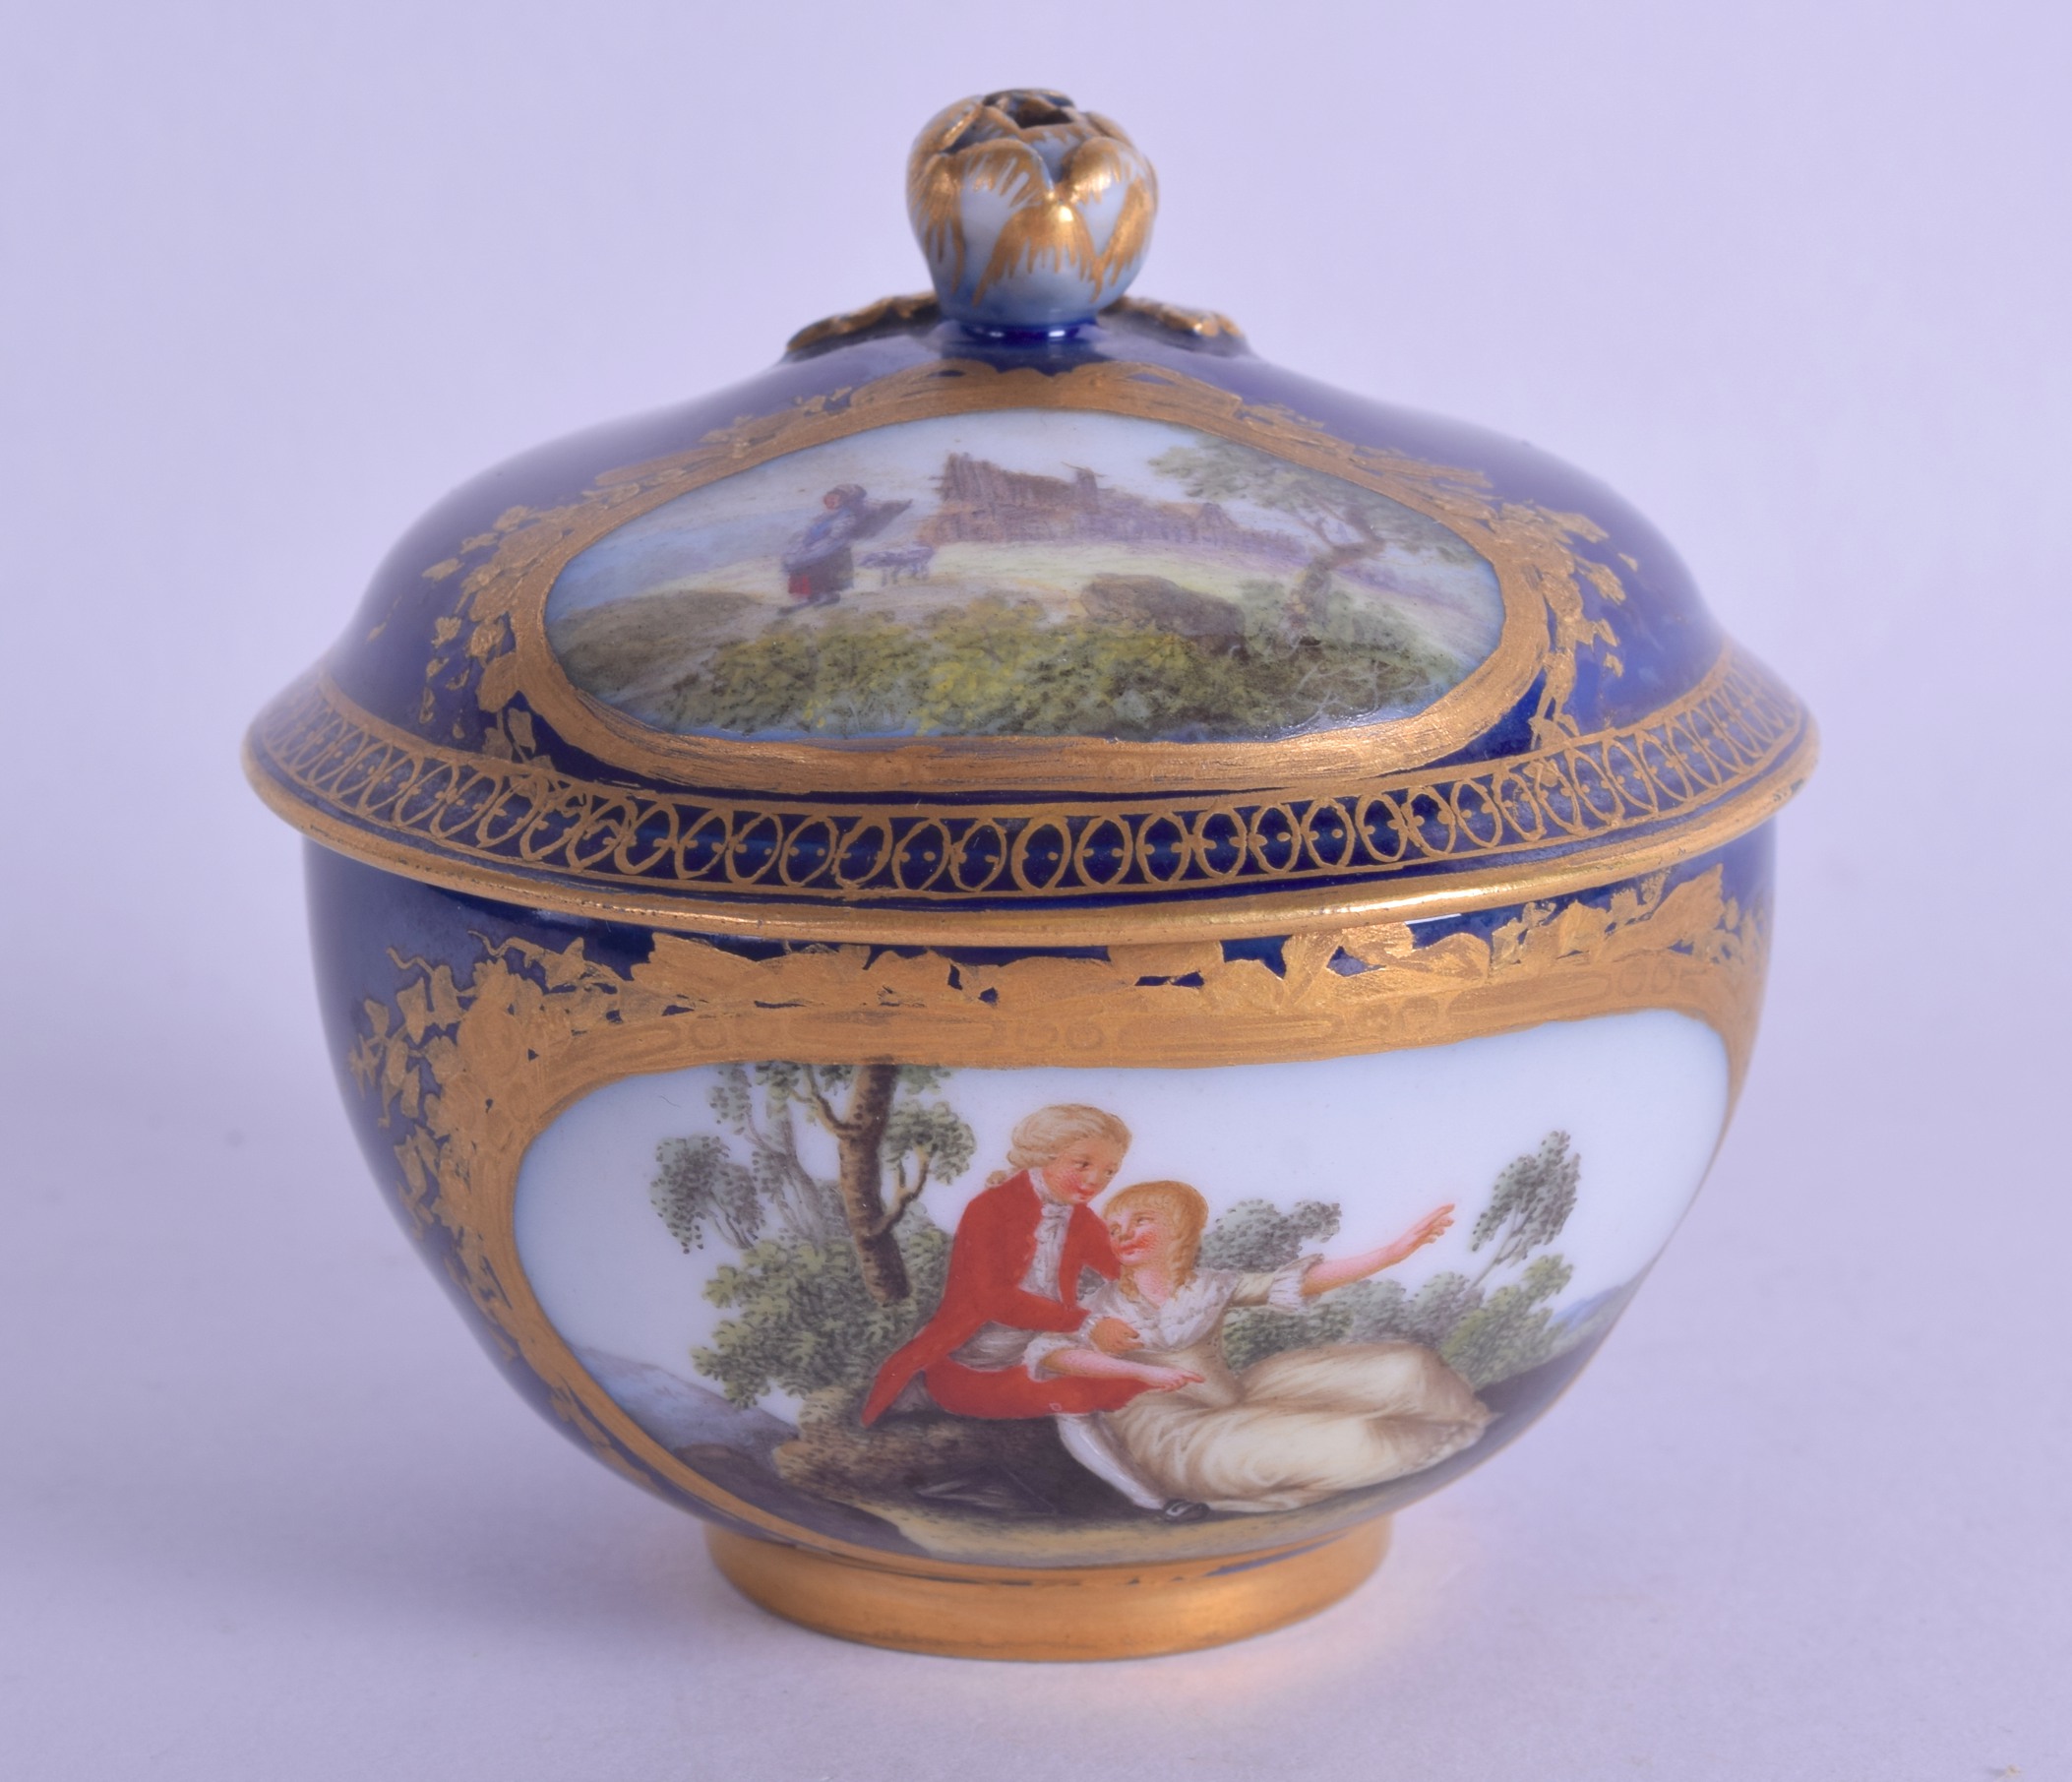 A 19TH CENTURY MEISSEN PORCELAIN CUP AND COVER painted with figures within landscapes. 8 cm wide. - Image 2 of 3